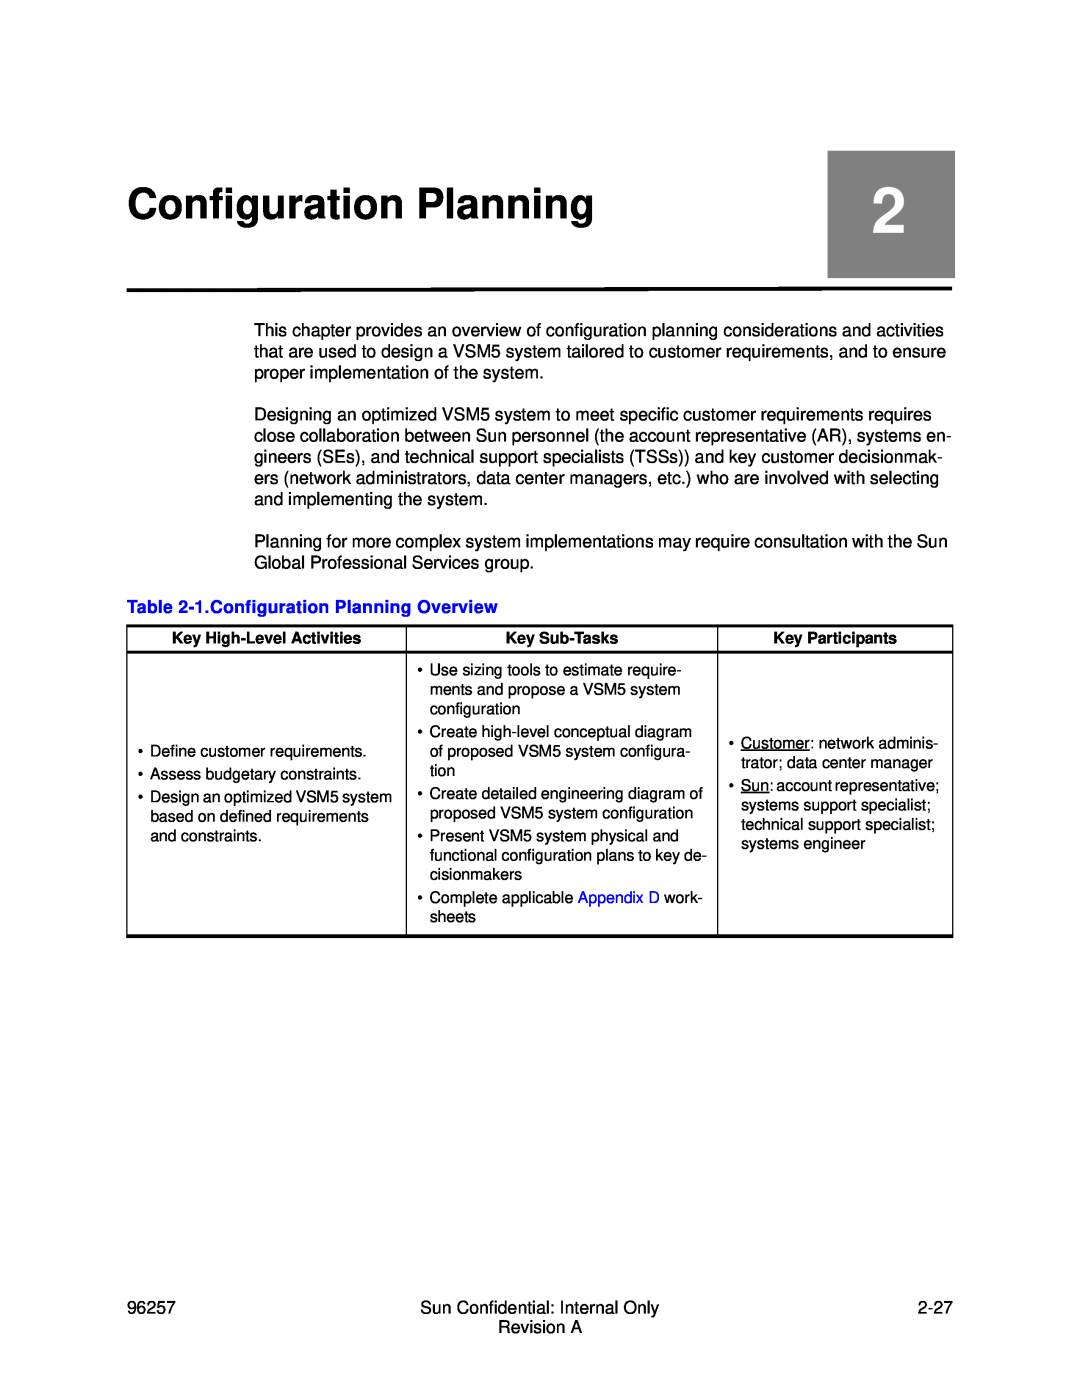 Sun Microsystems 96257 manual 1.Configuration Planning Overview 